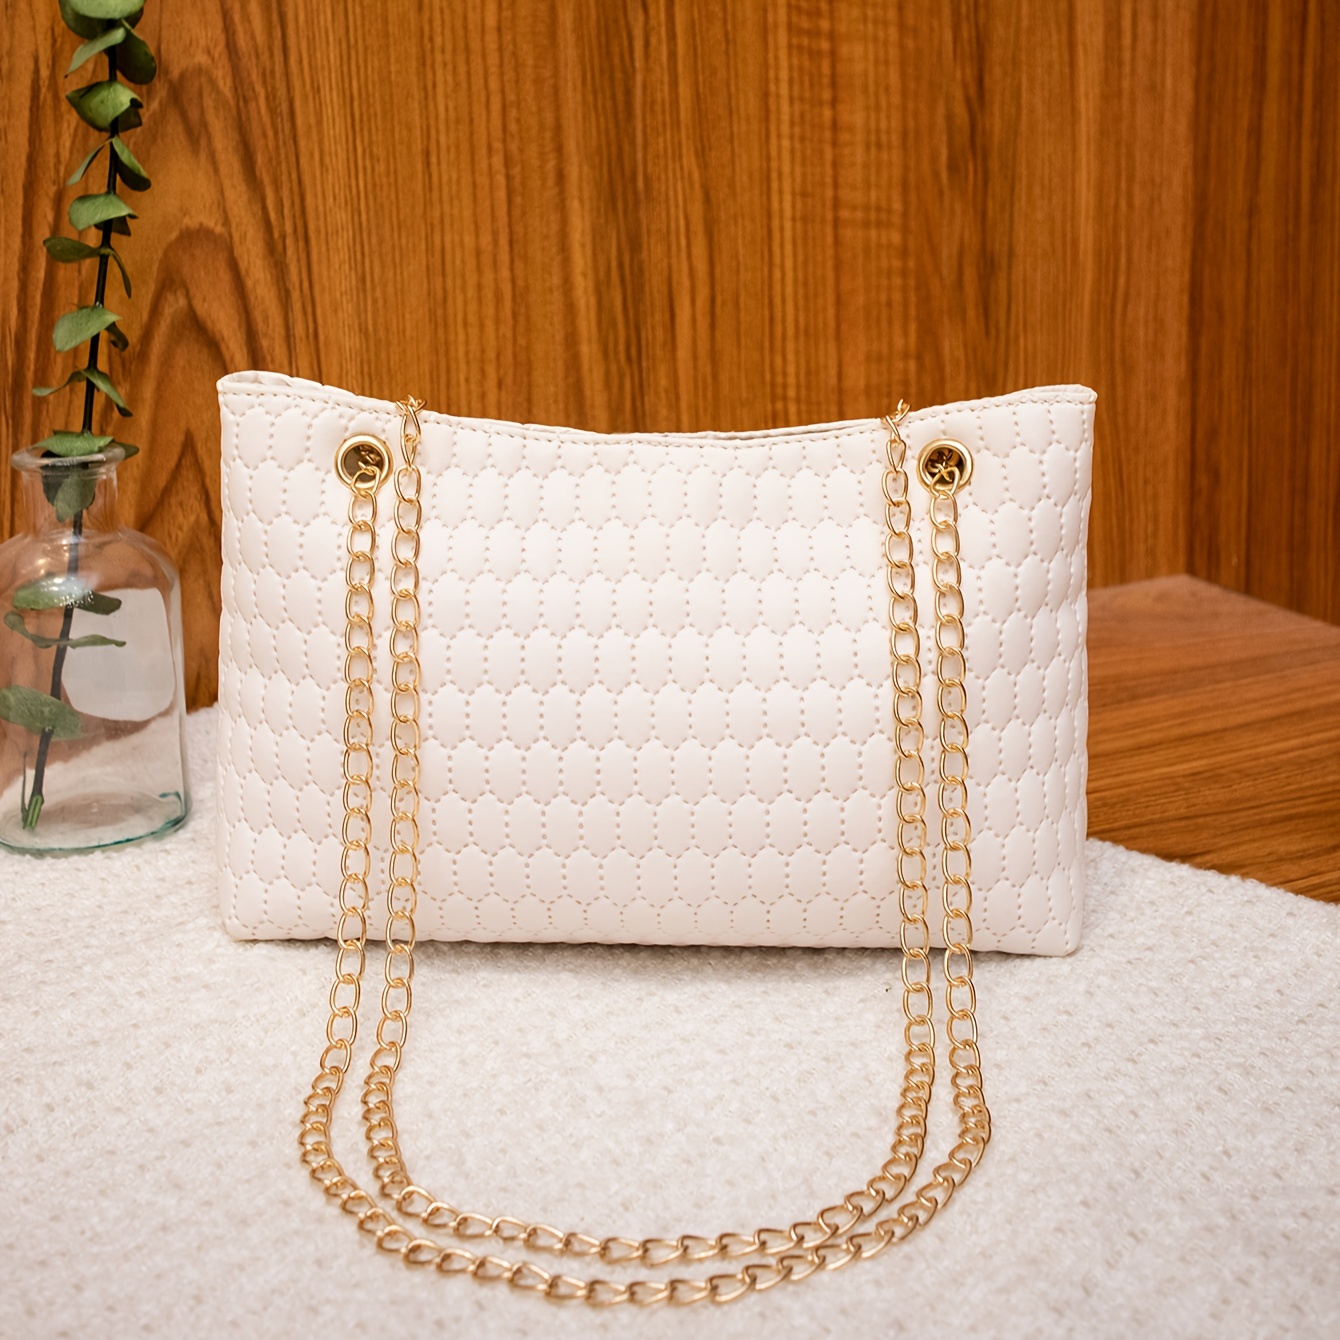 Quilted Chain Tote Bag, Simple Pu Leather Handbag, Women's Large